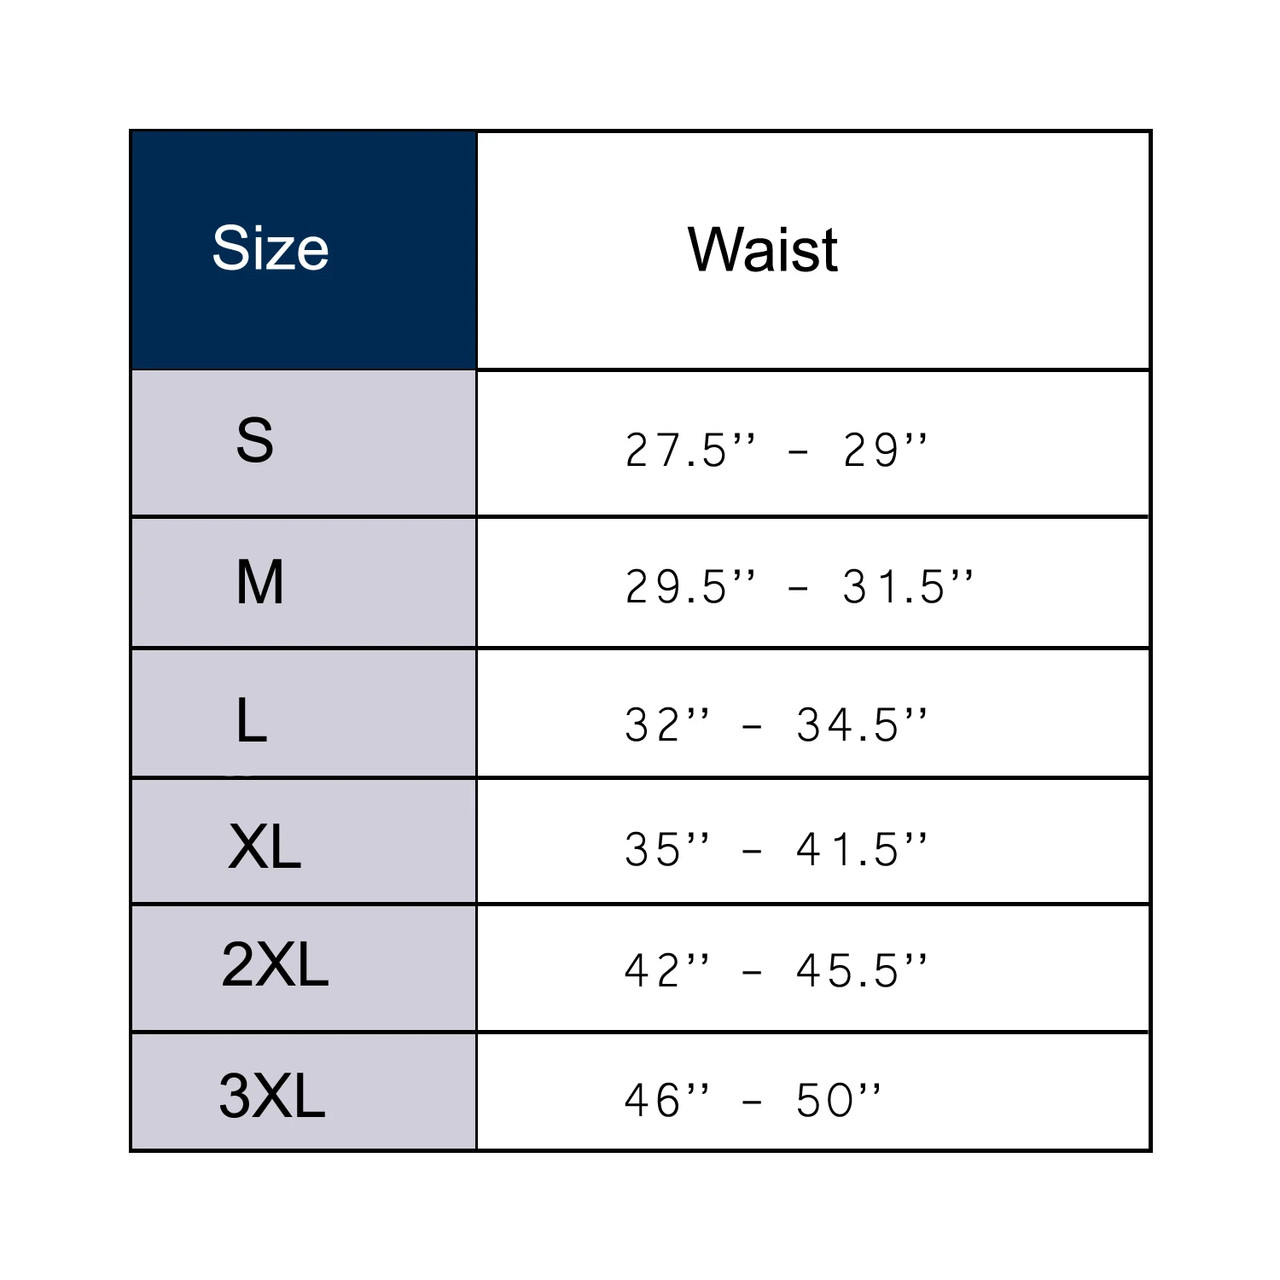 Women's Double Compression Waist Trainer Breathable Trimmer product image